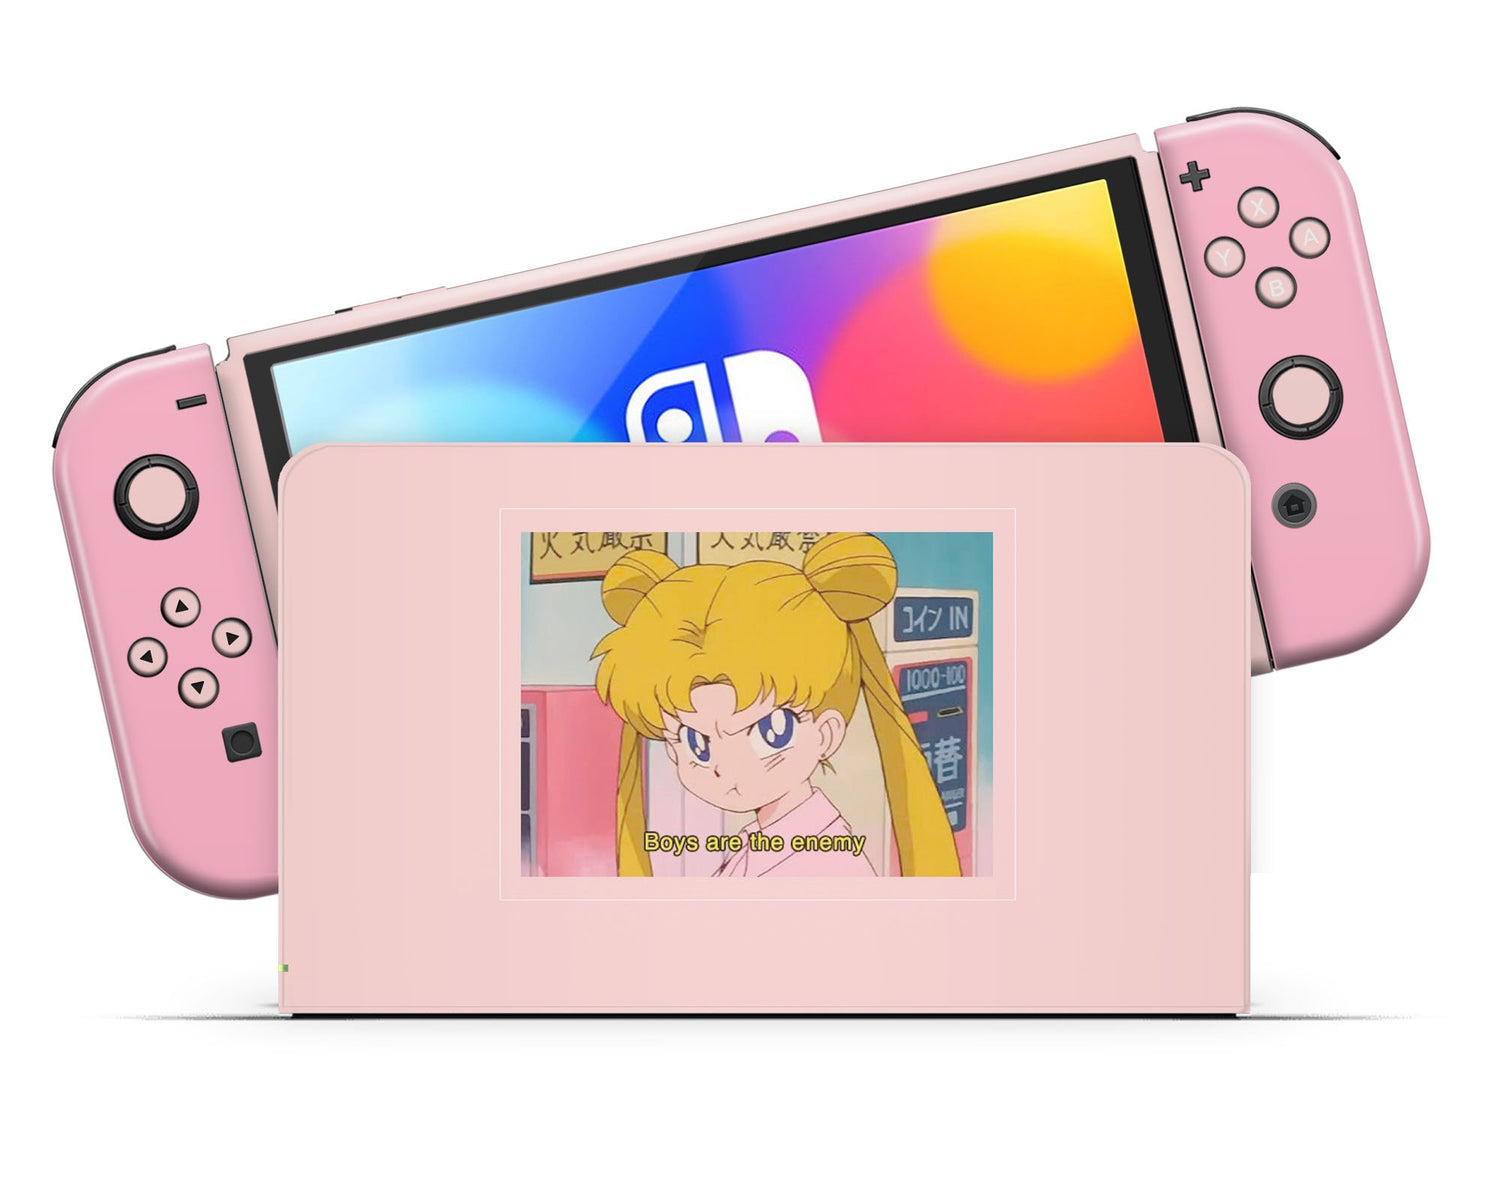 Lux Skins Nintendo Switch OLED Sailor Moon Boys Are the Enemy Full Set Skins - Pop culture Sailor Moon Skin